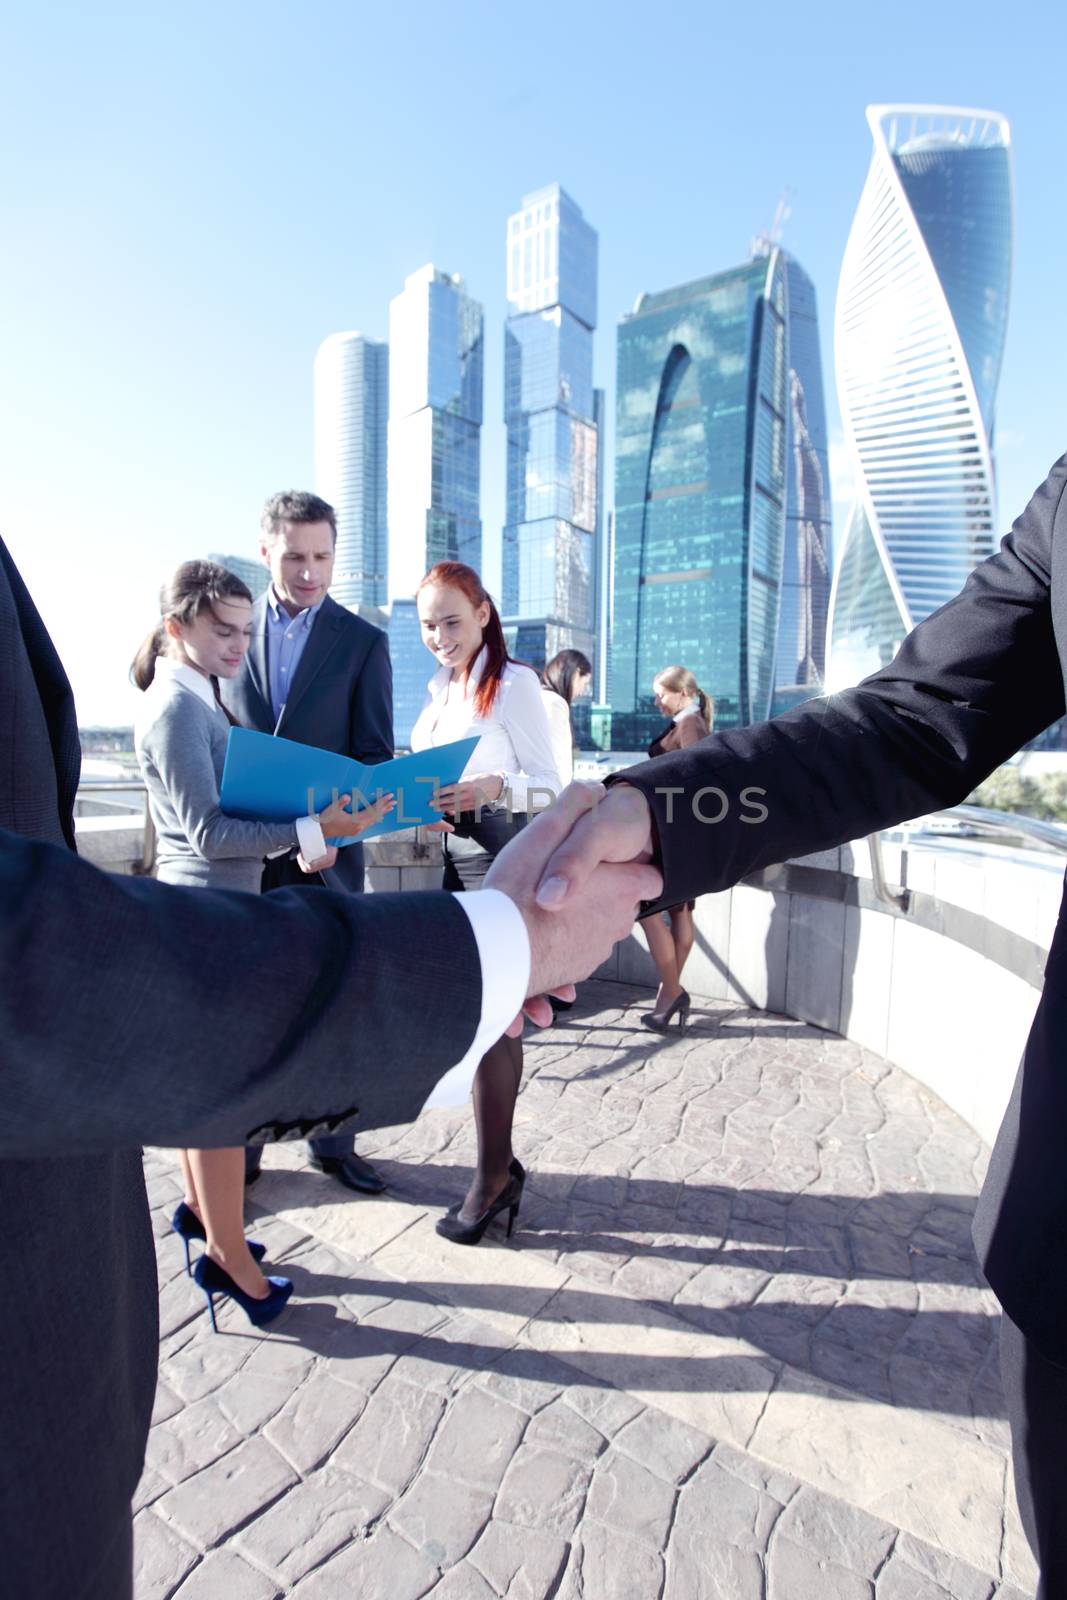 Business people meeting outdoors by ALotOfPeople